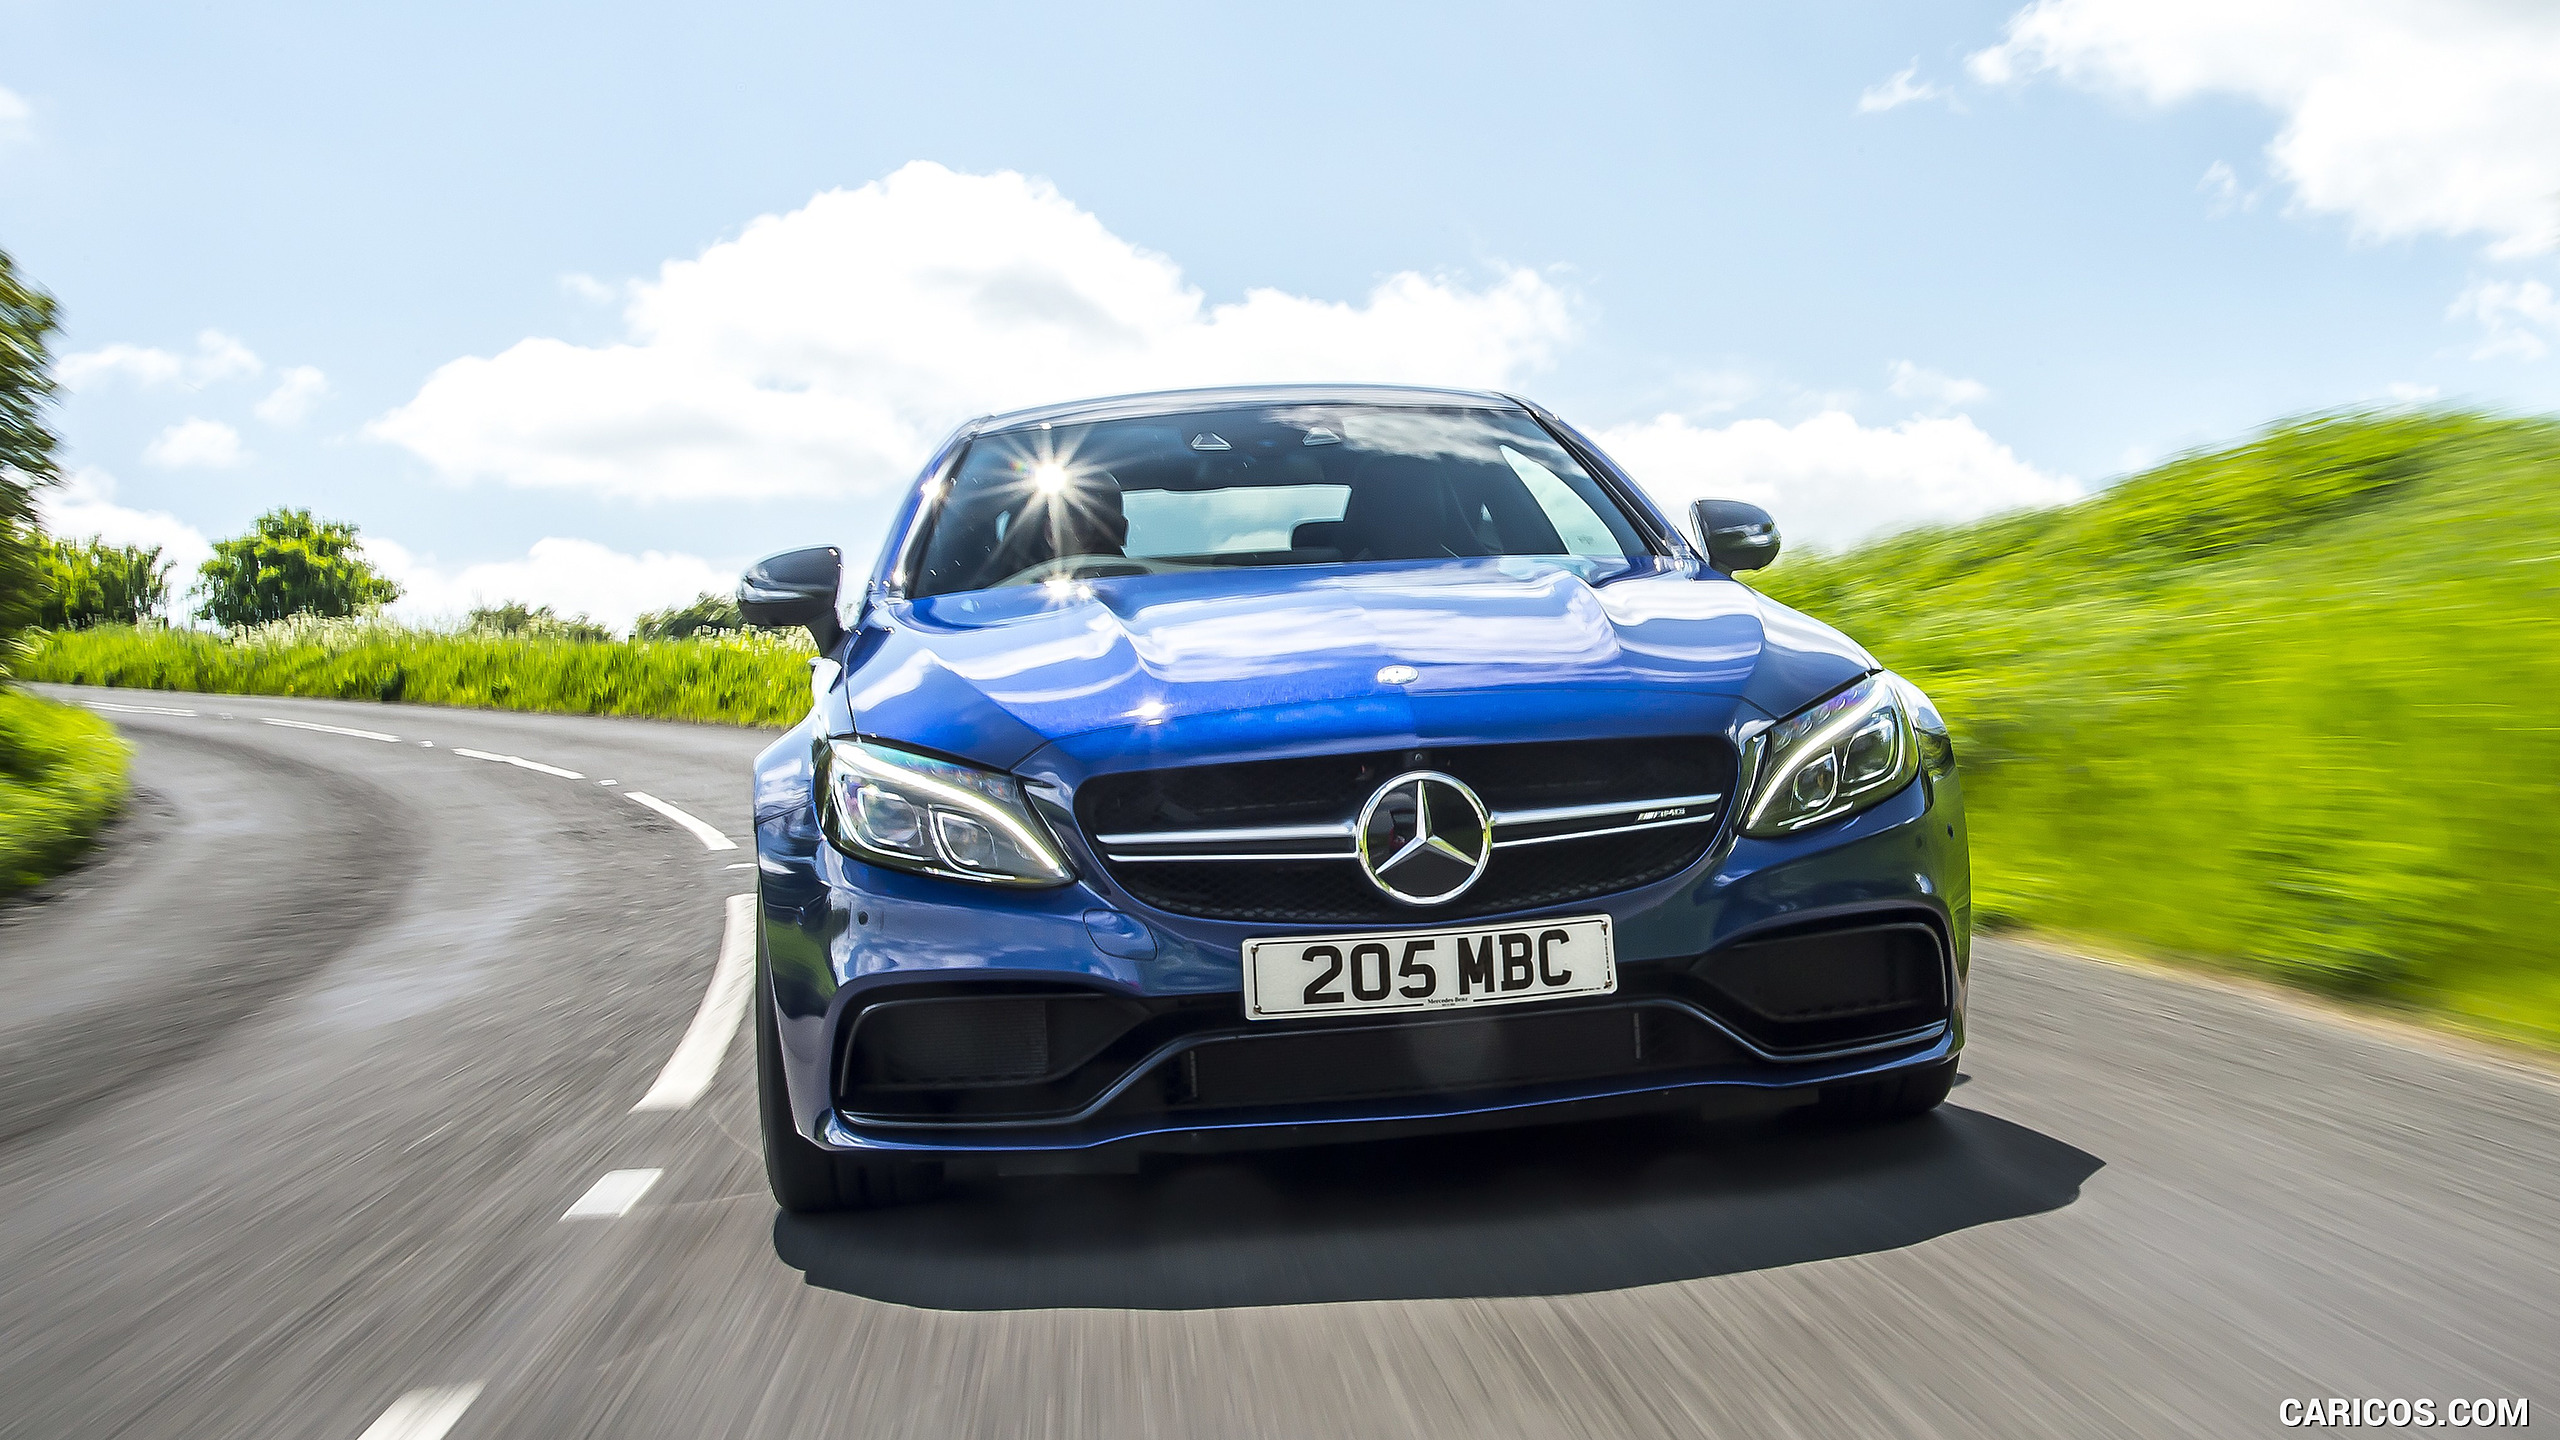 2017 Mercedes-AMG C63 S Coupe (UK-Spec) - Front, #11 of 52